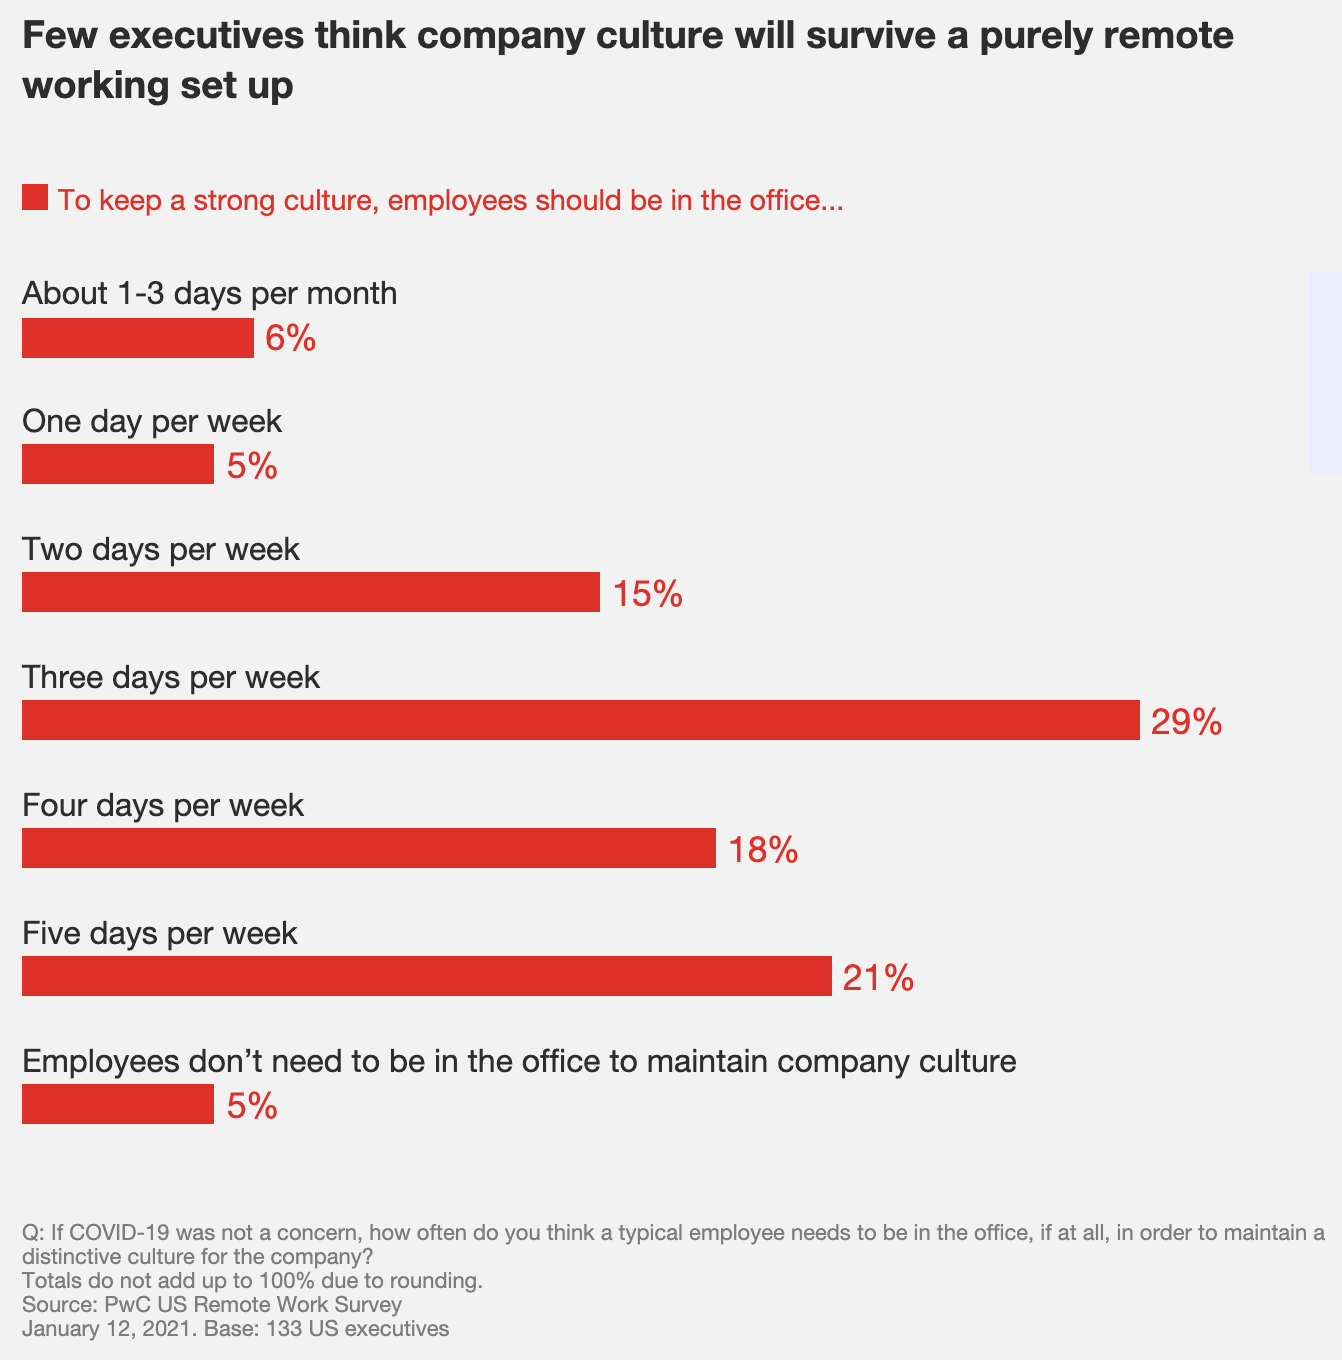 Few executives think company culture will survive a purely remote working set up